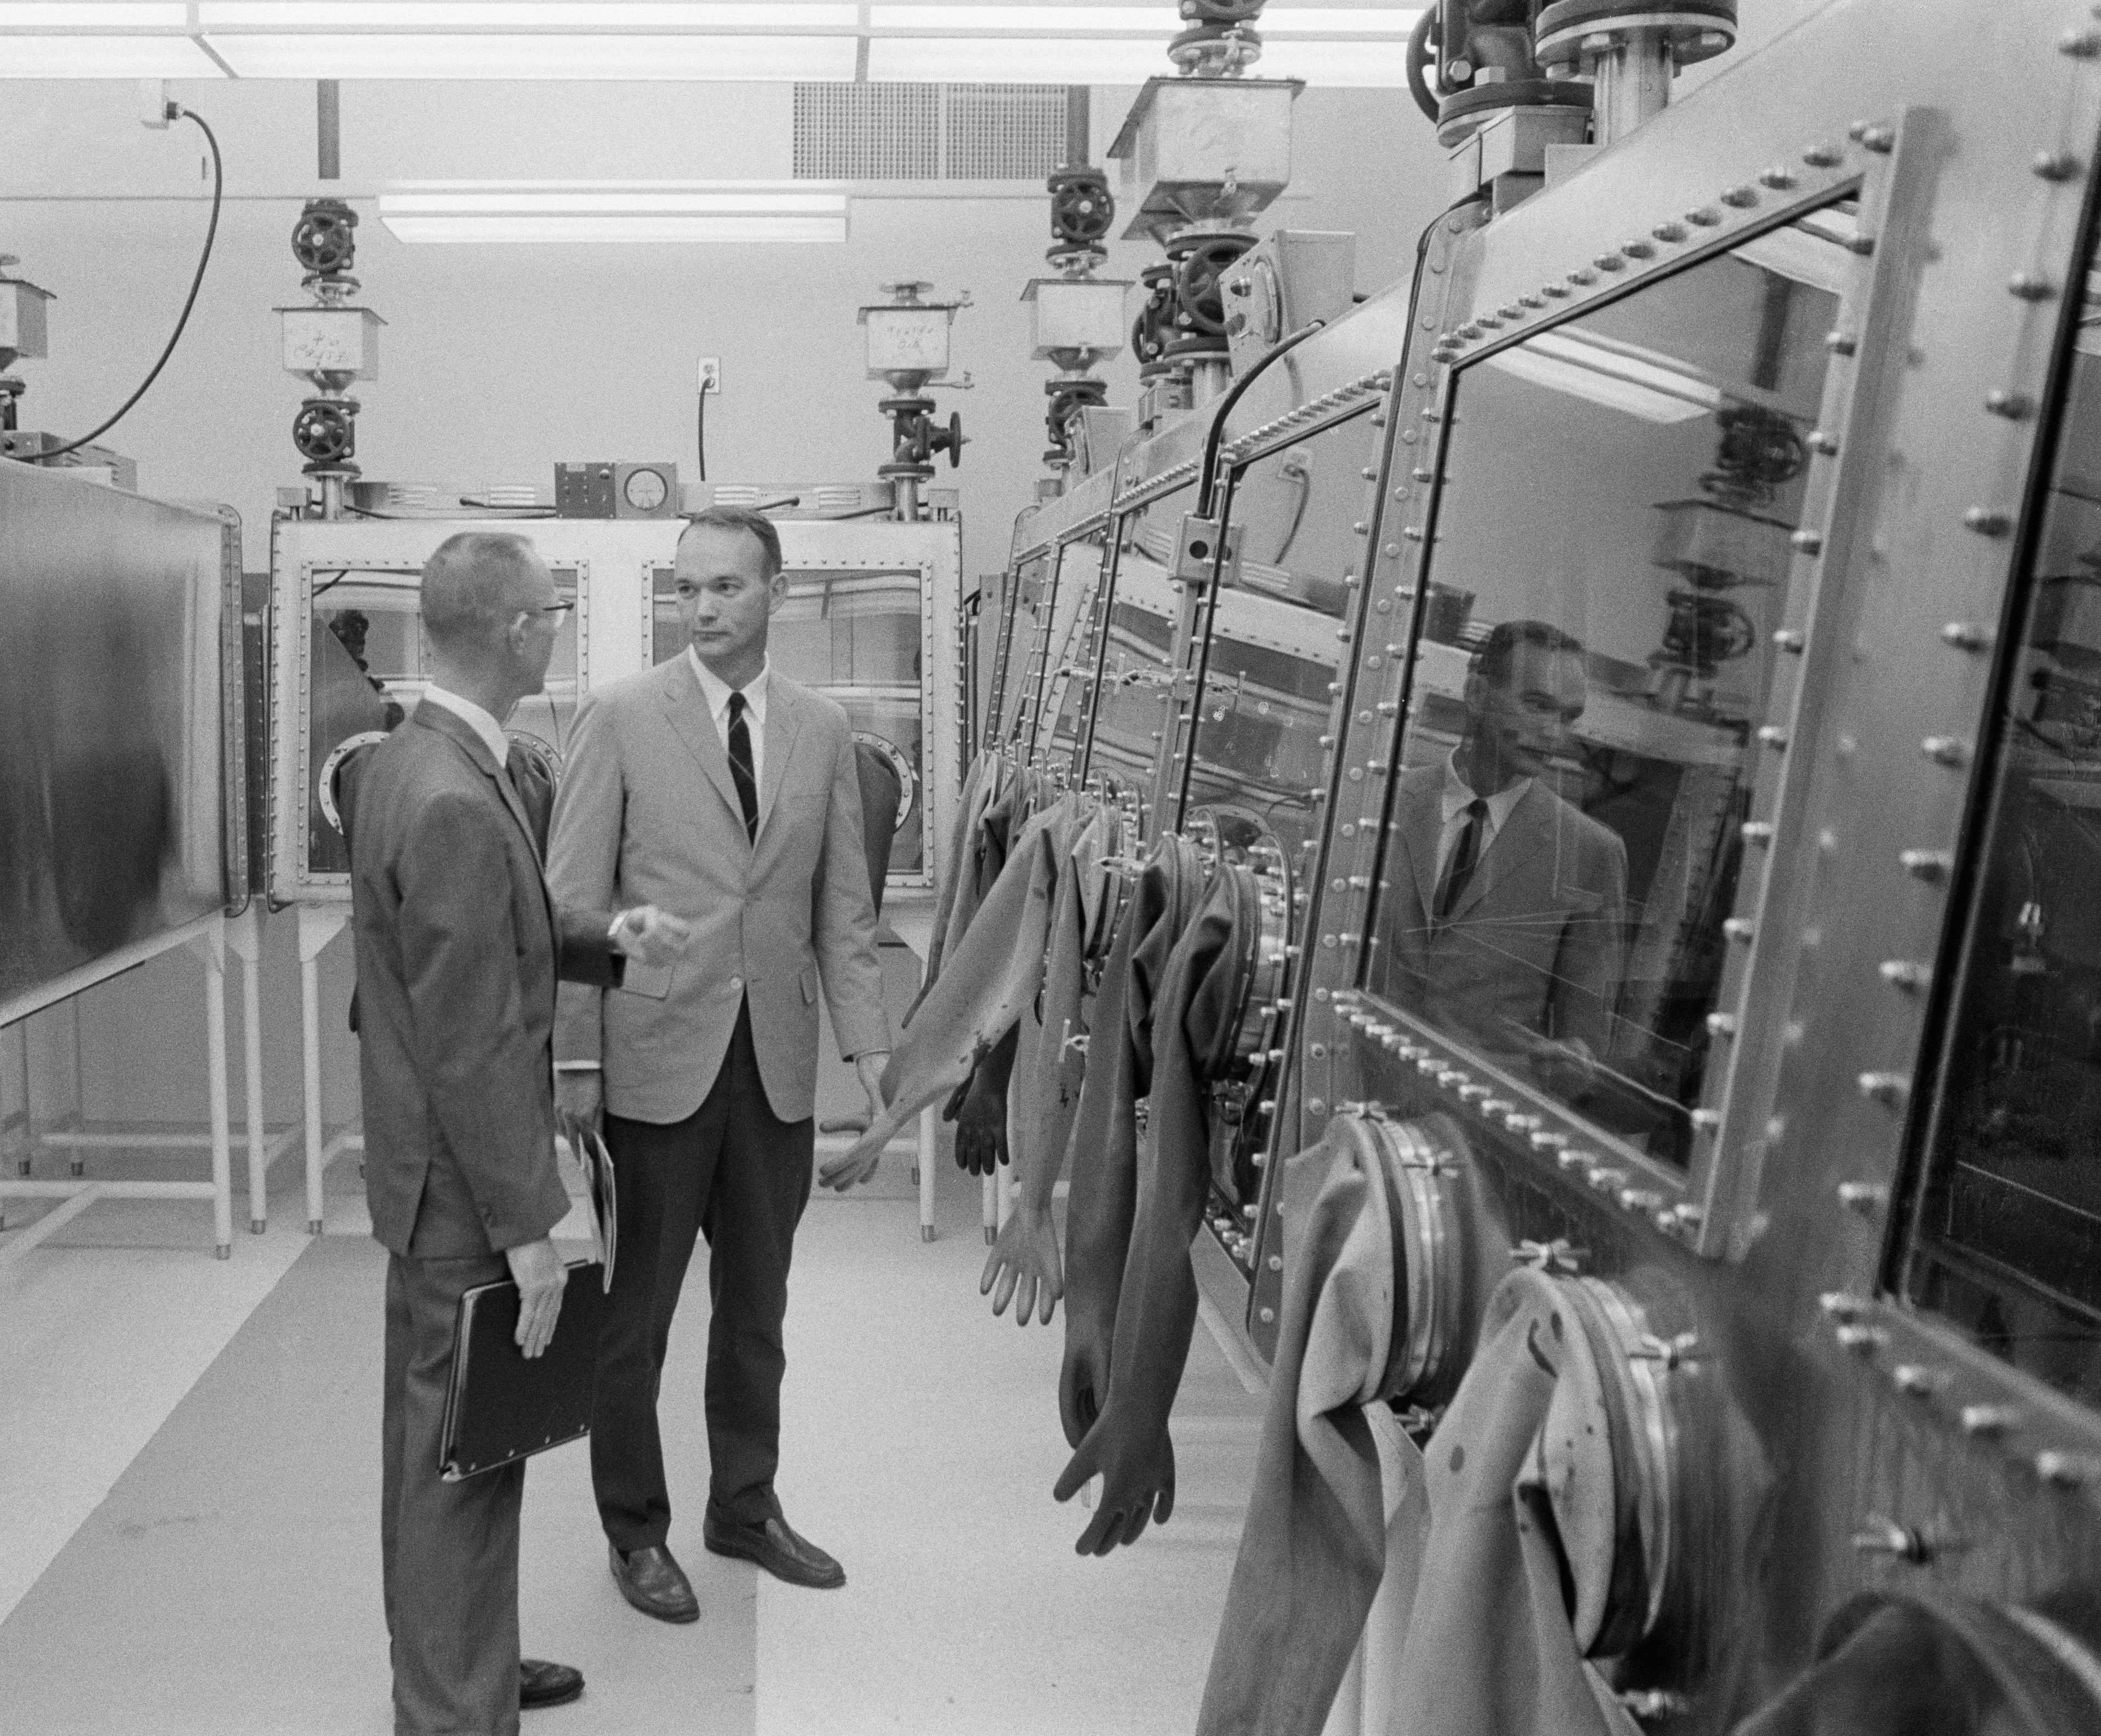 Richard Wright, administrative assistant for the Lunar Receiving Laboratory, gives astronaut Michael Collins a tour of the gloveboxes for examining lunar samples